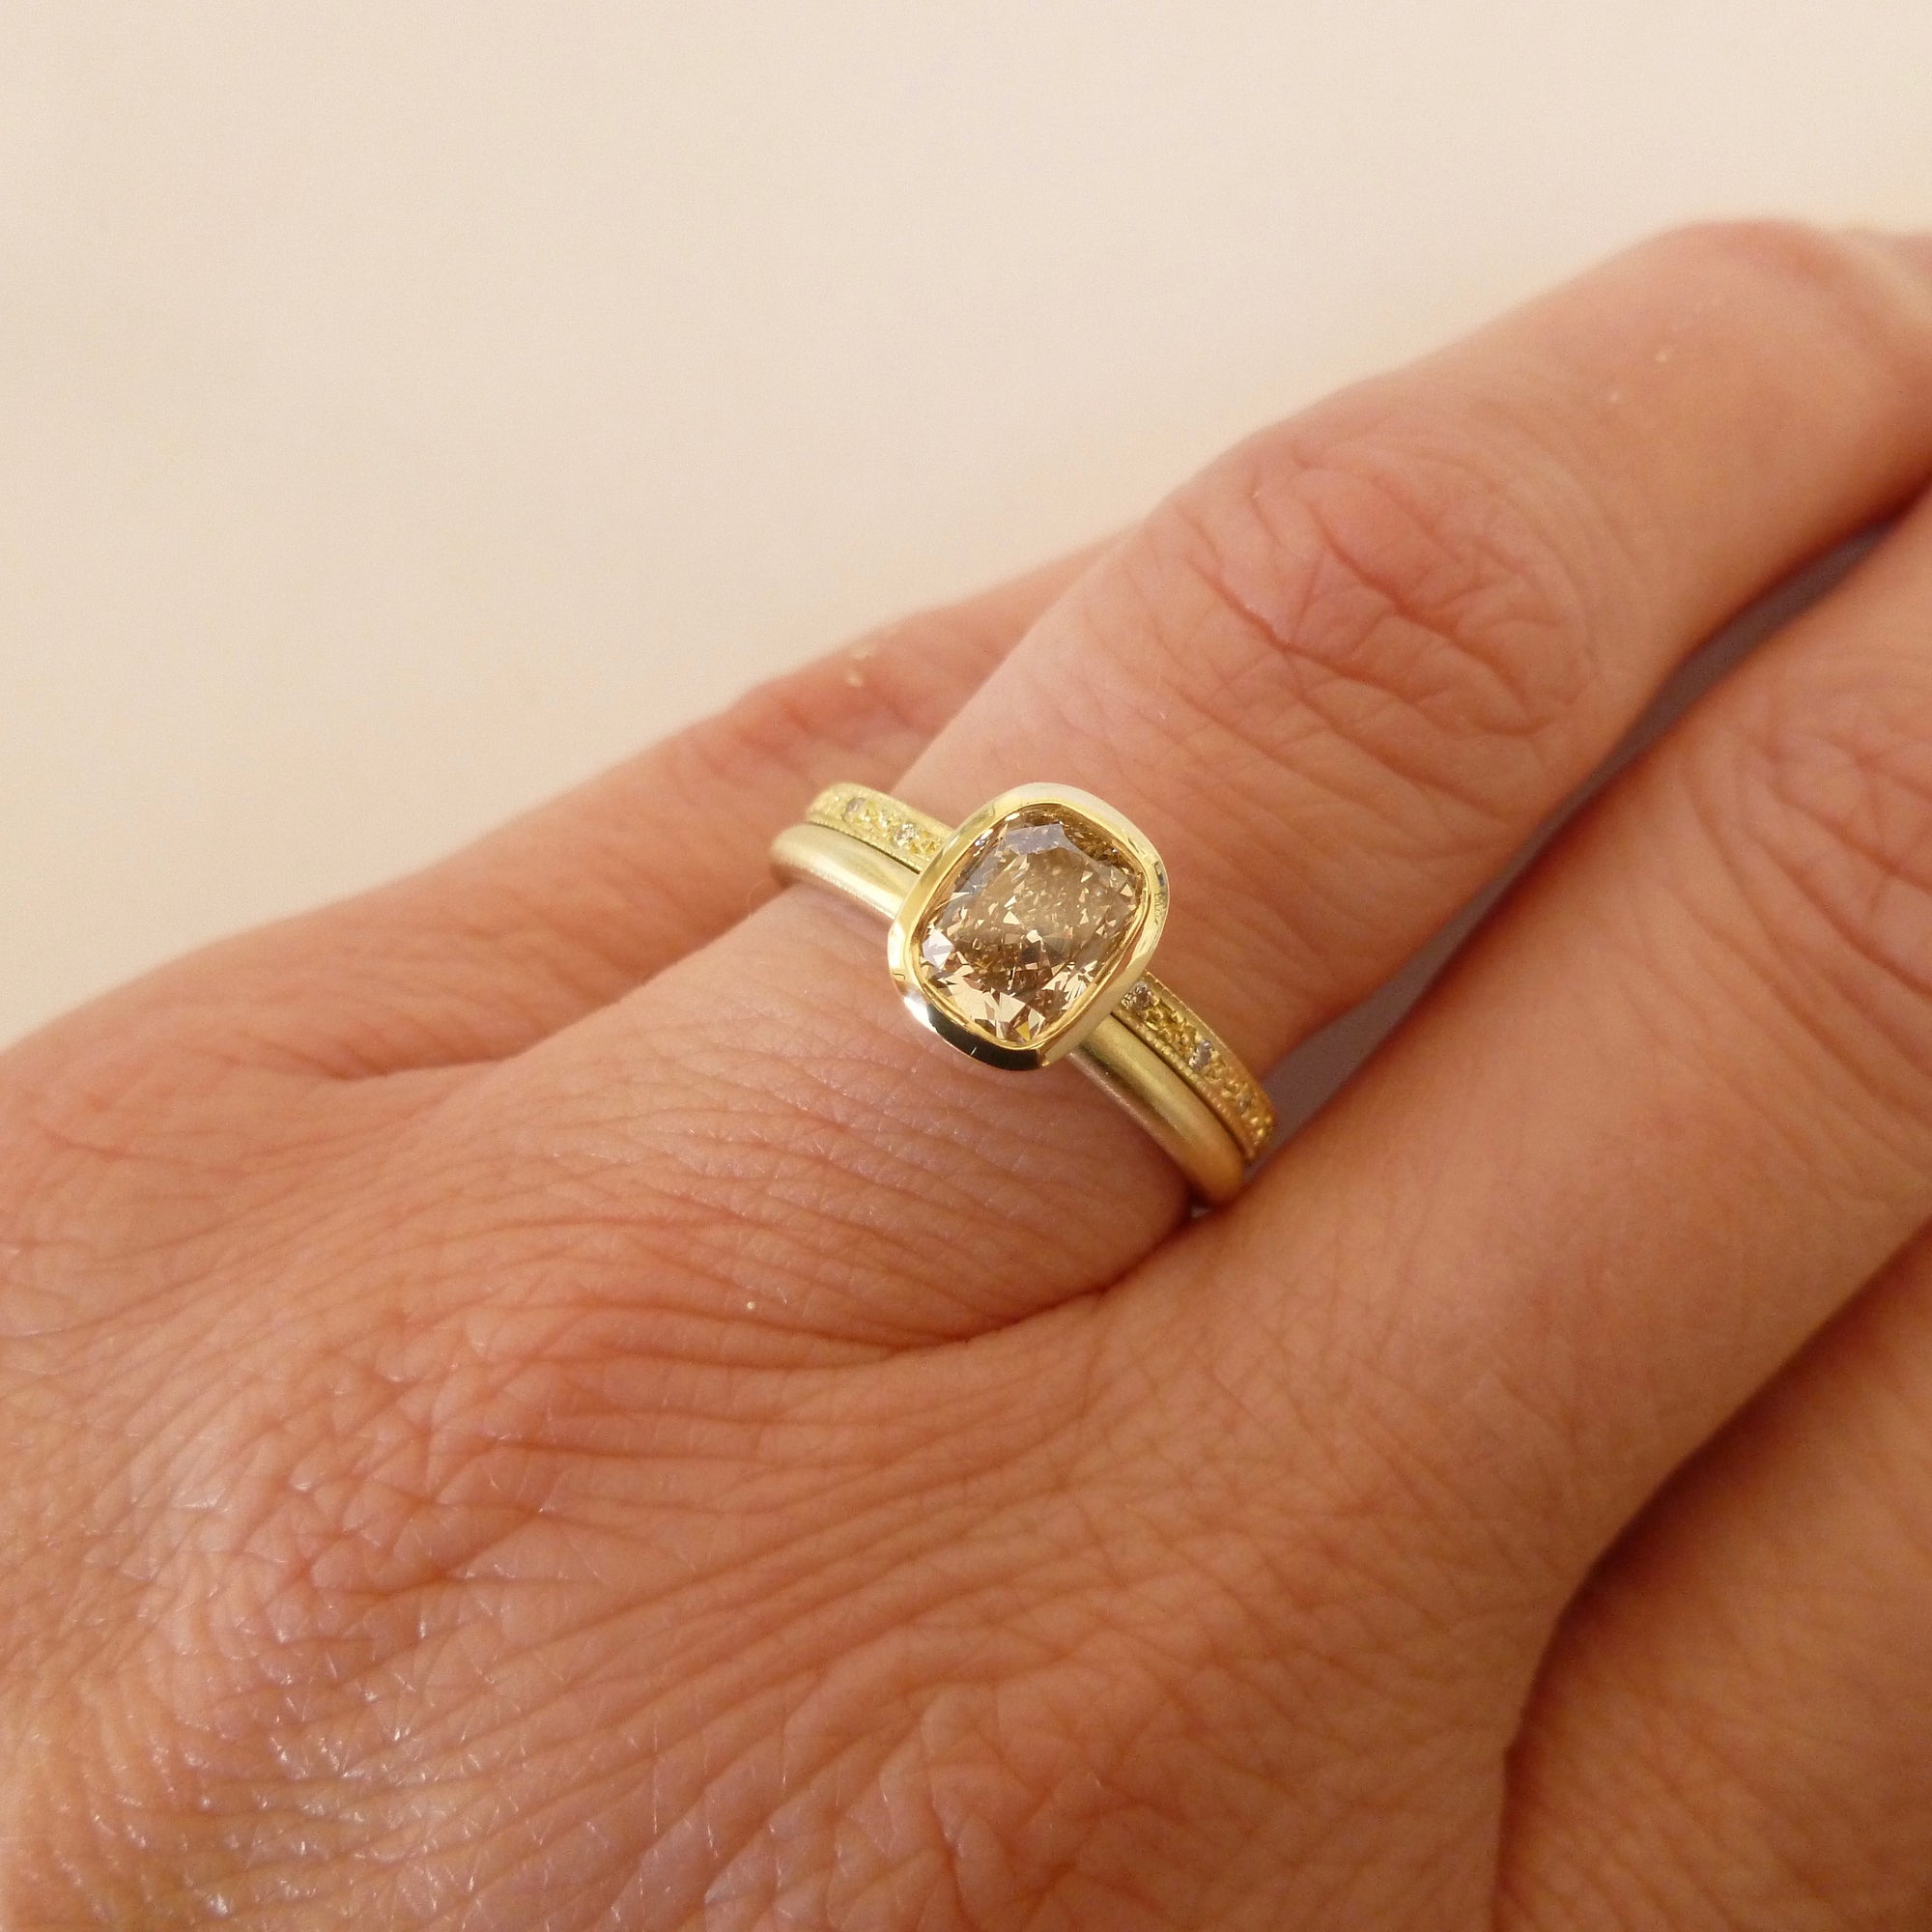 Unique, one off cushion cut champagne diamond stacking ring set, a modern engagement or wedding ring handmade in UK by Sue Lane